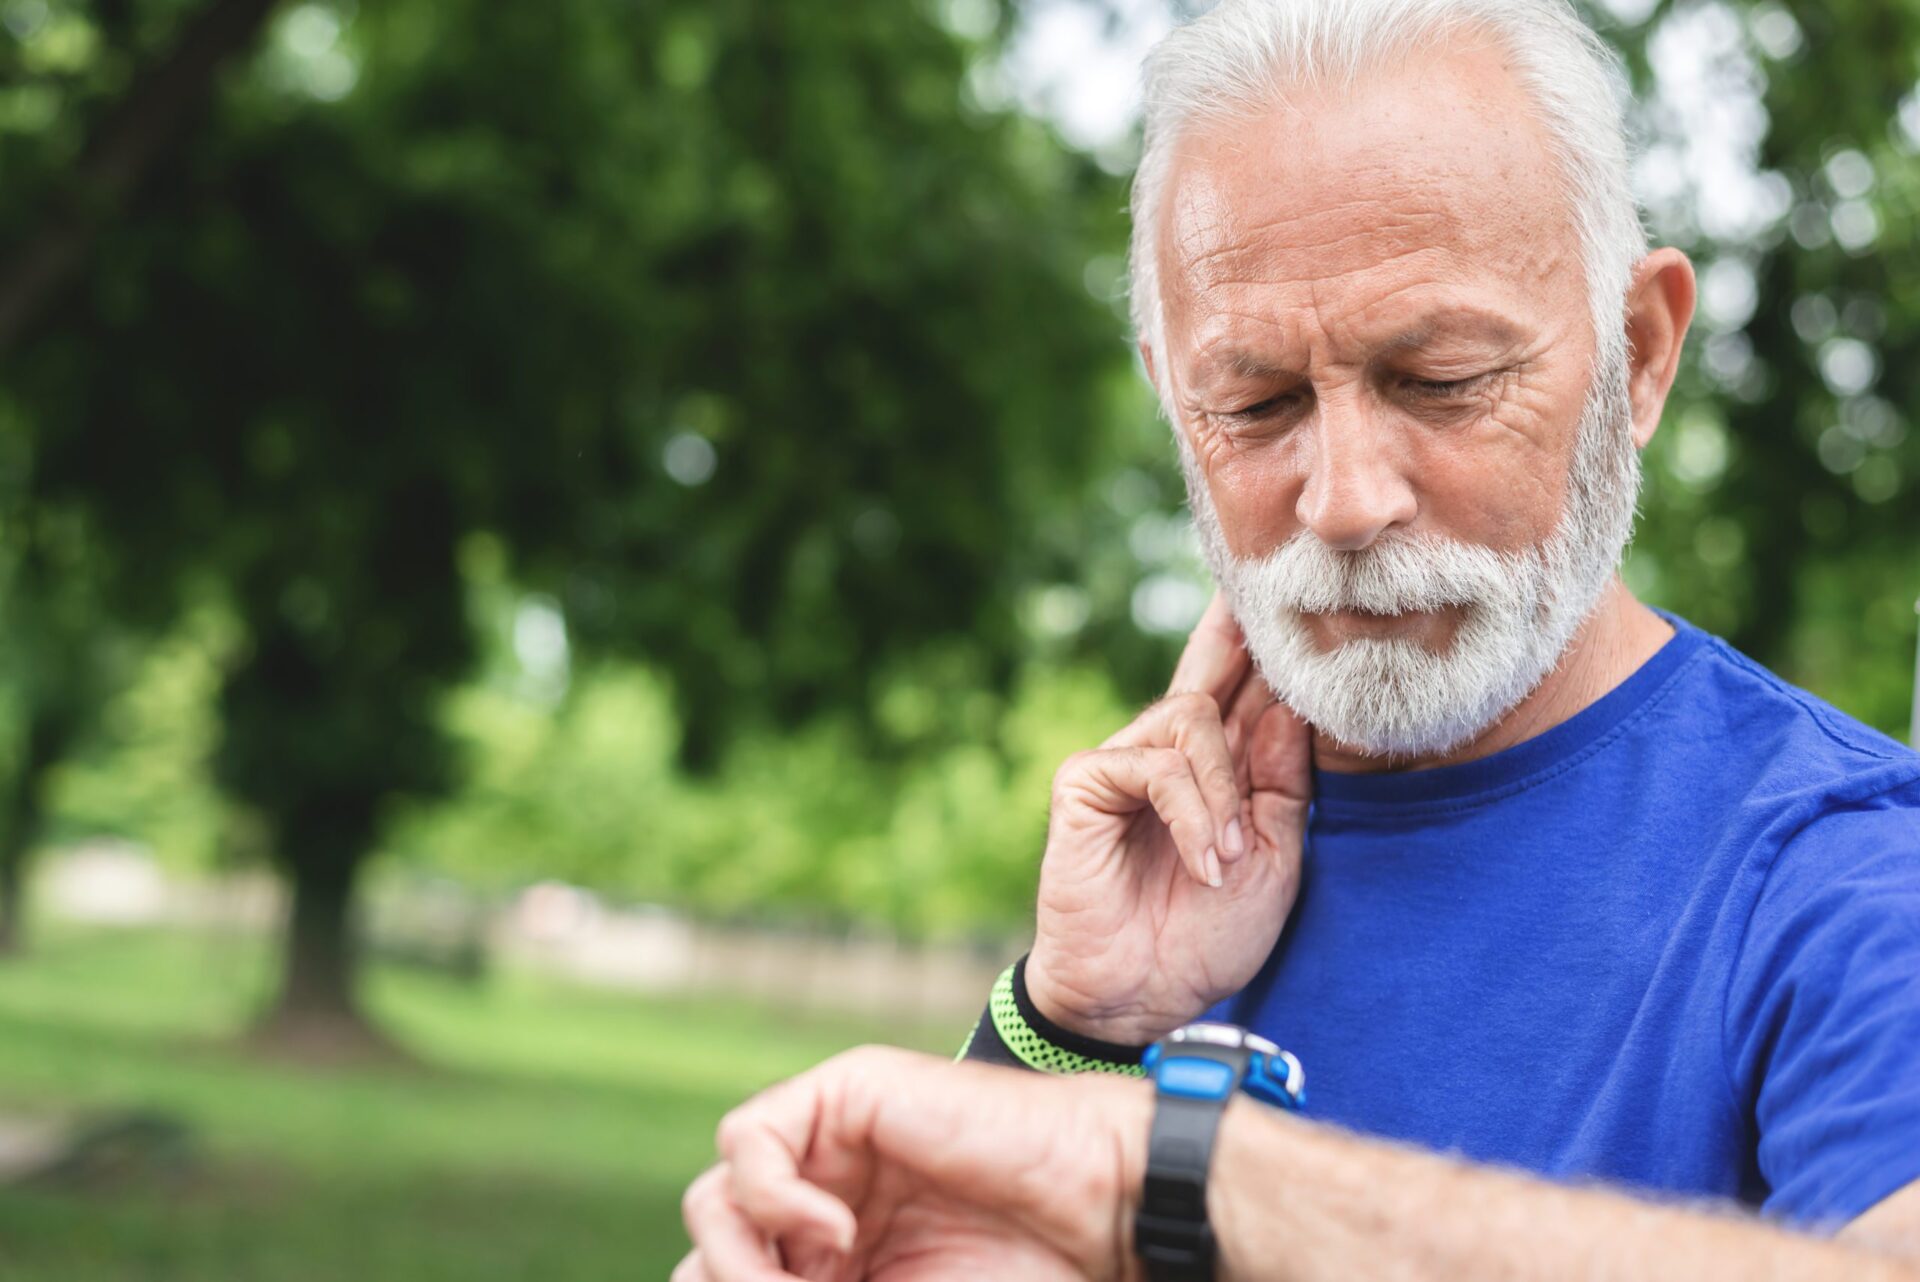 An older man in athletic clothing looks at his watch while he takes his pulse at his neck